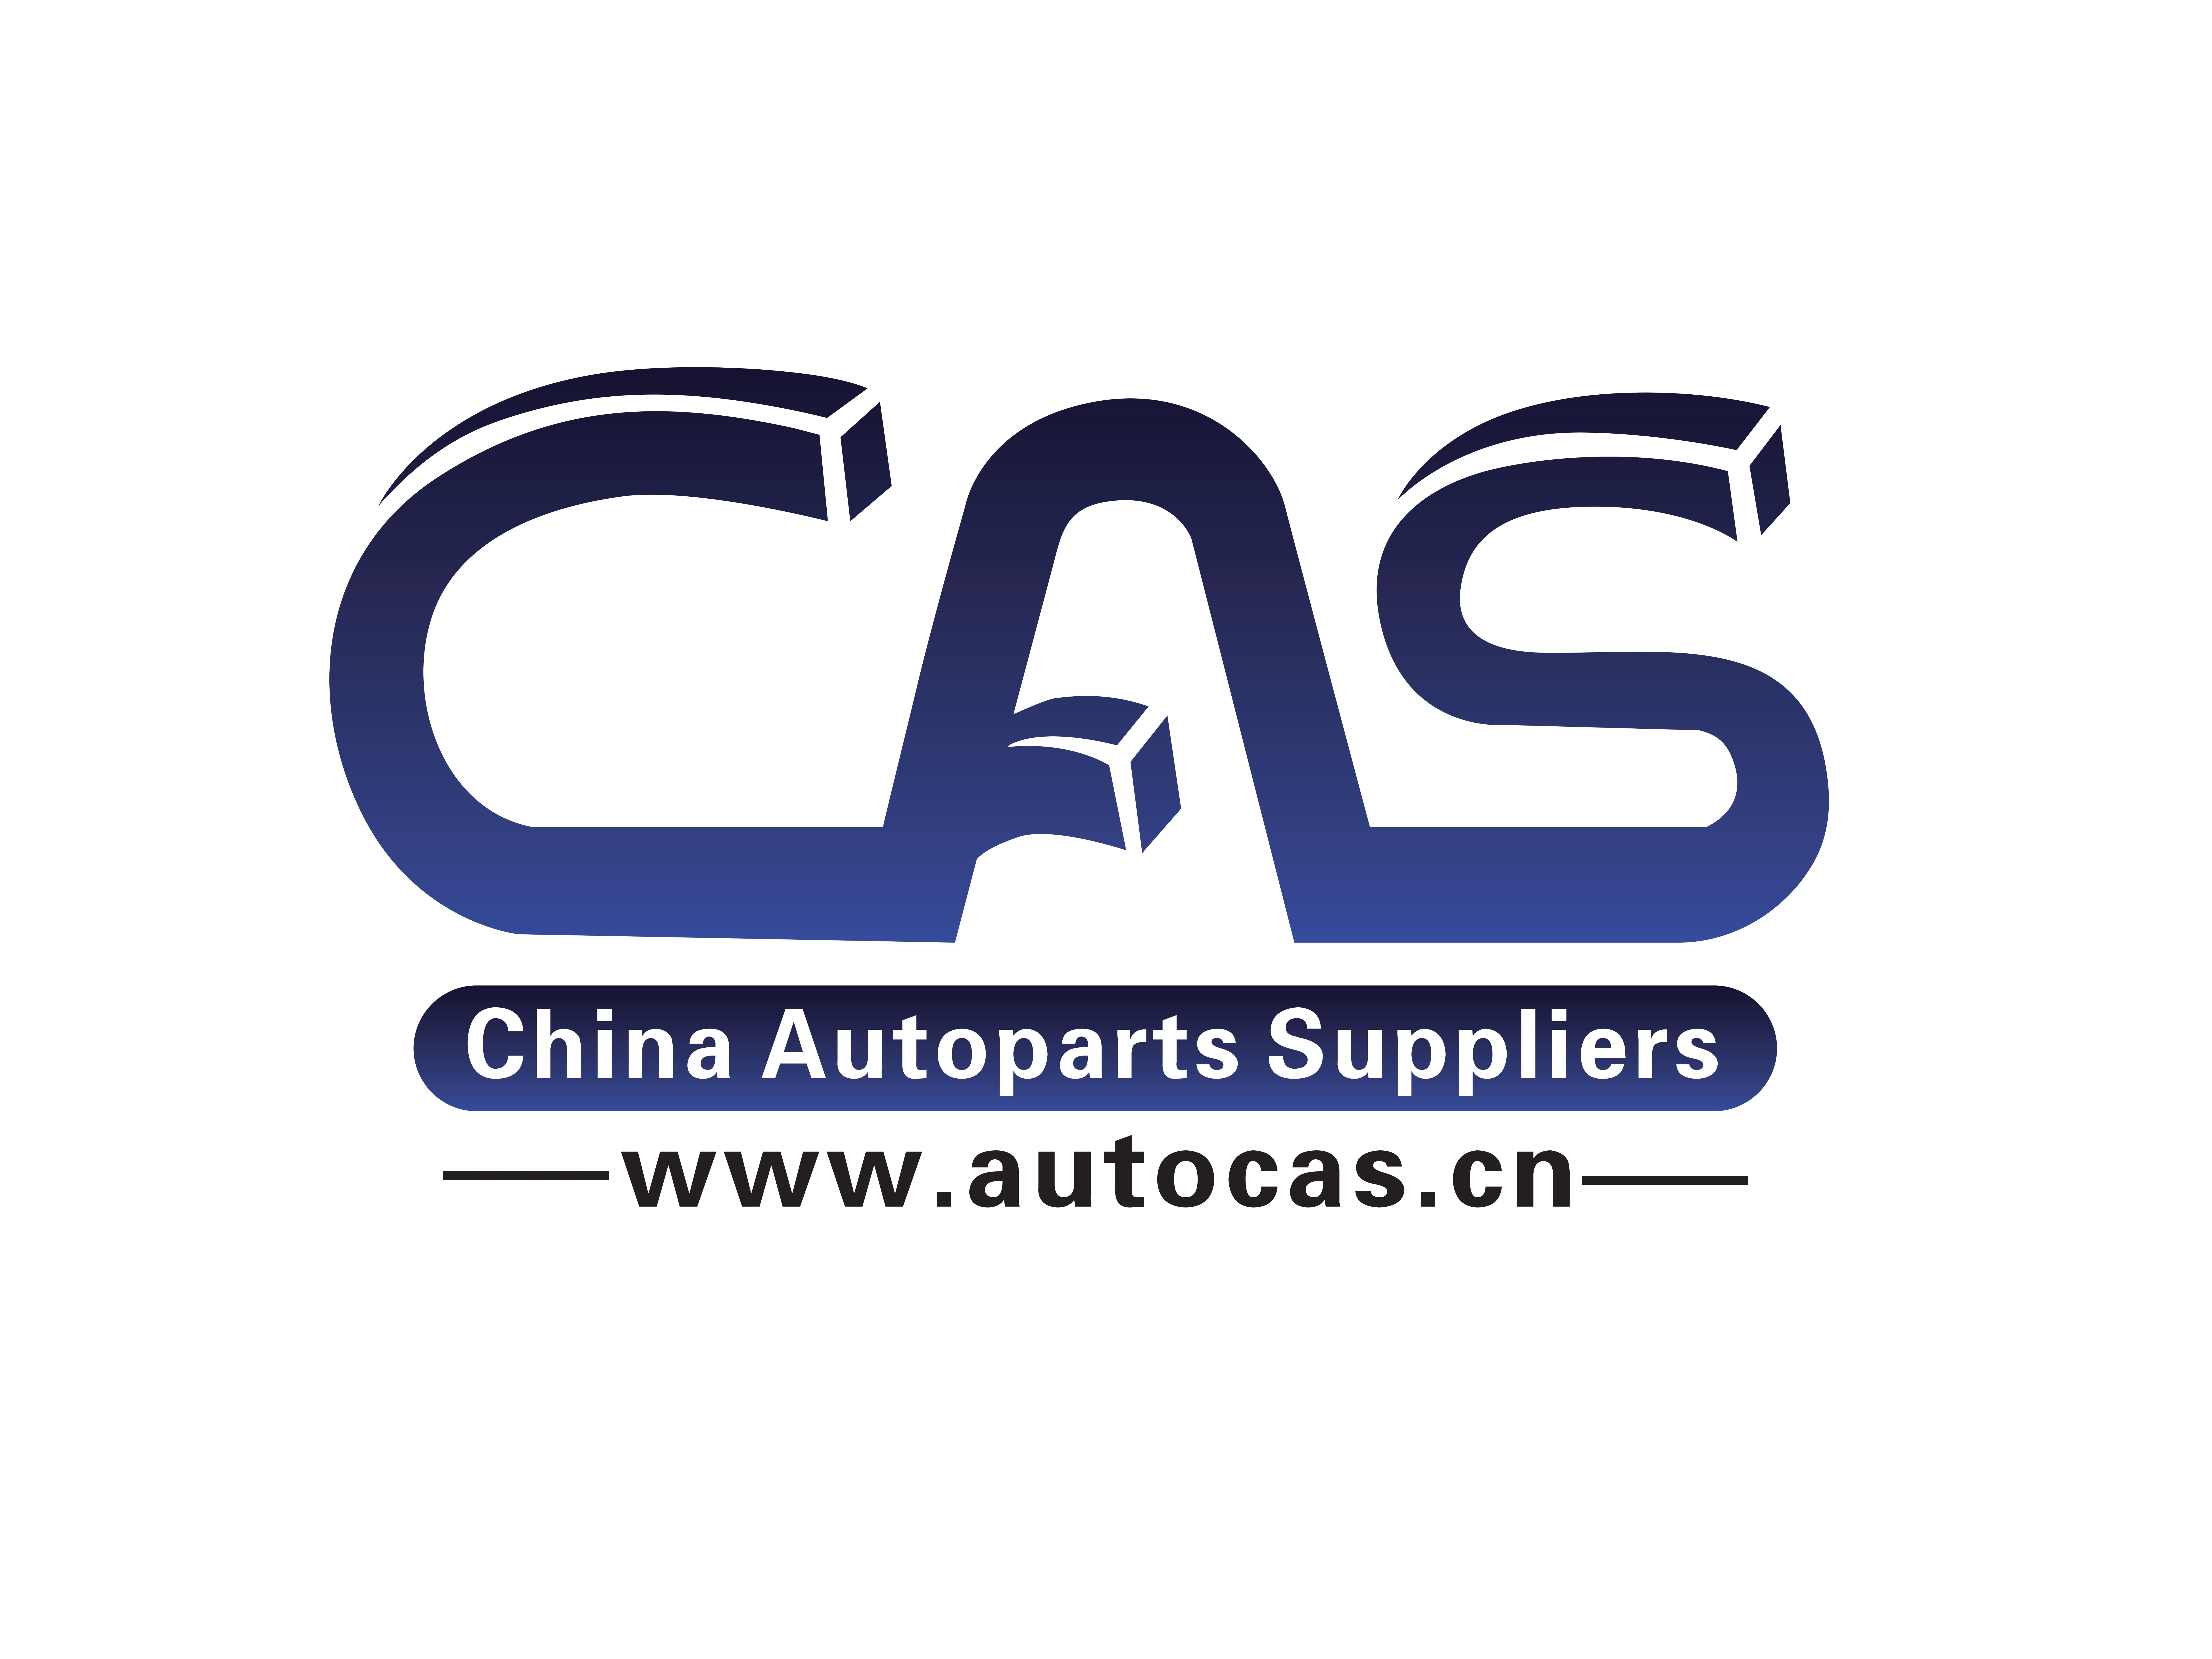 China Autoparts Suppliers (Kunpeng)